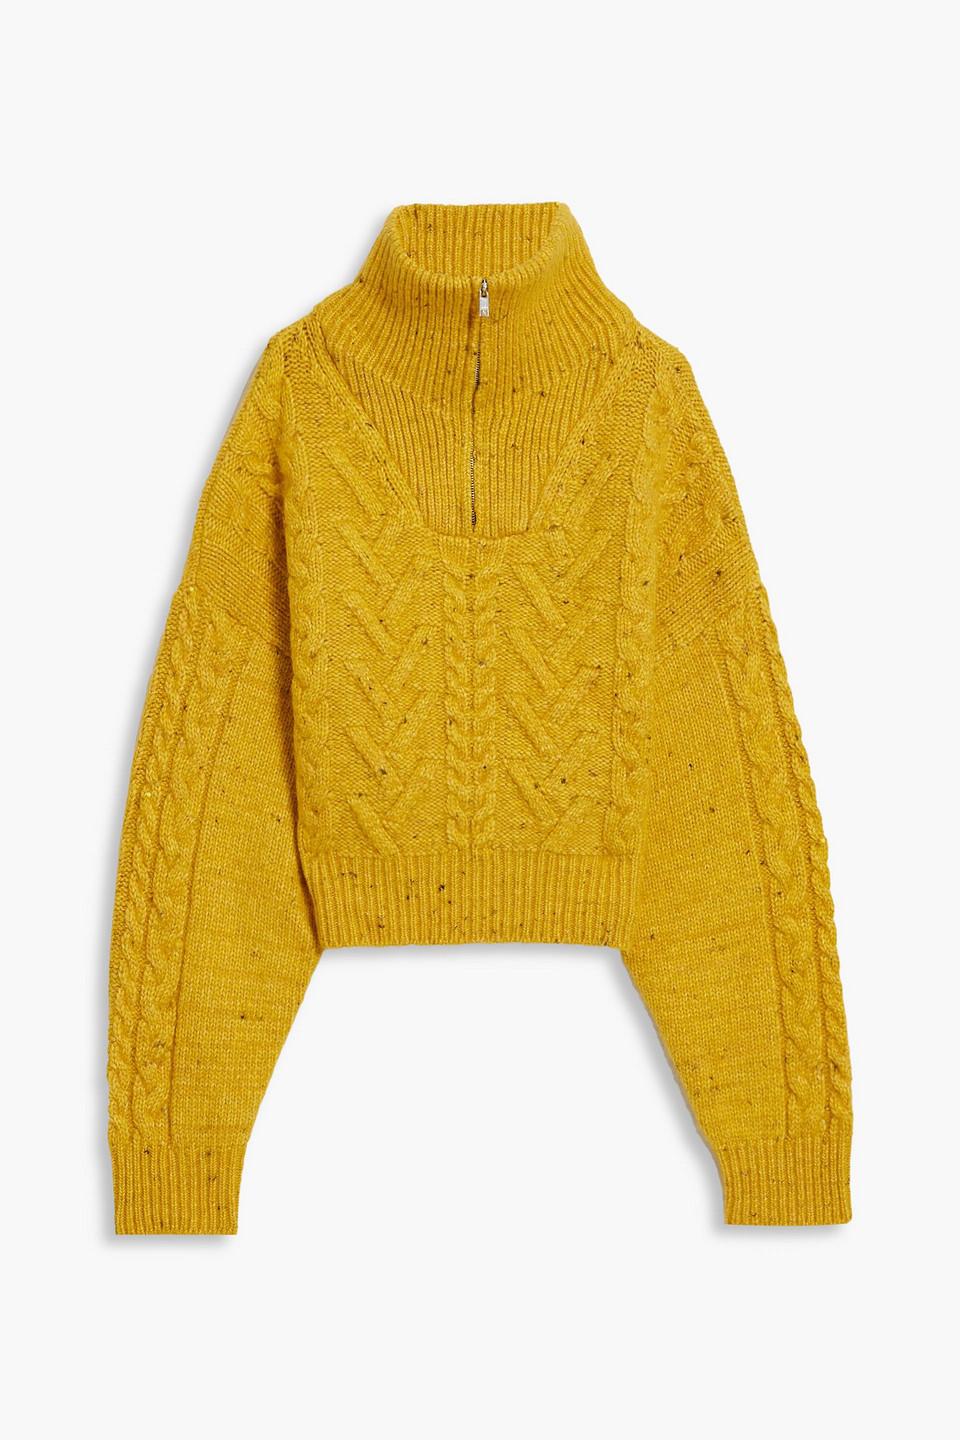 Ganni Donegal Cable And Ribbed-knit Half-zip Sweater in Yellow | Lyst